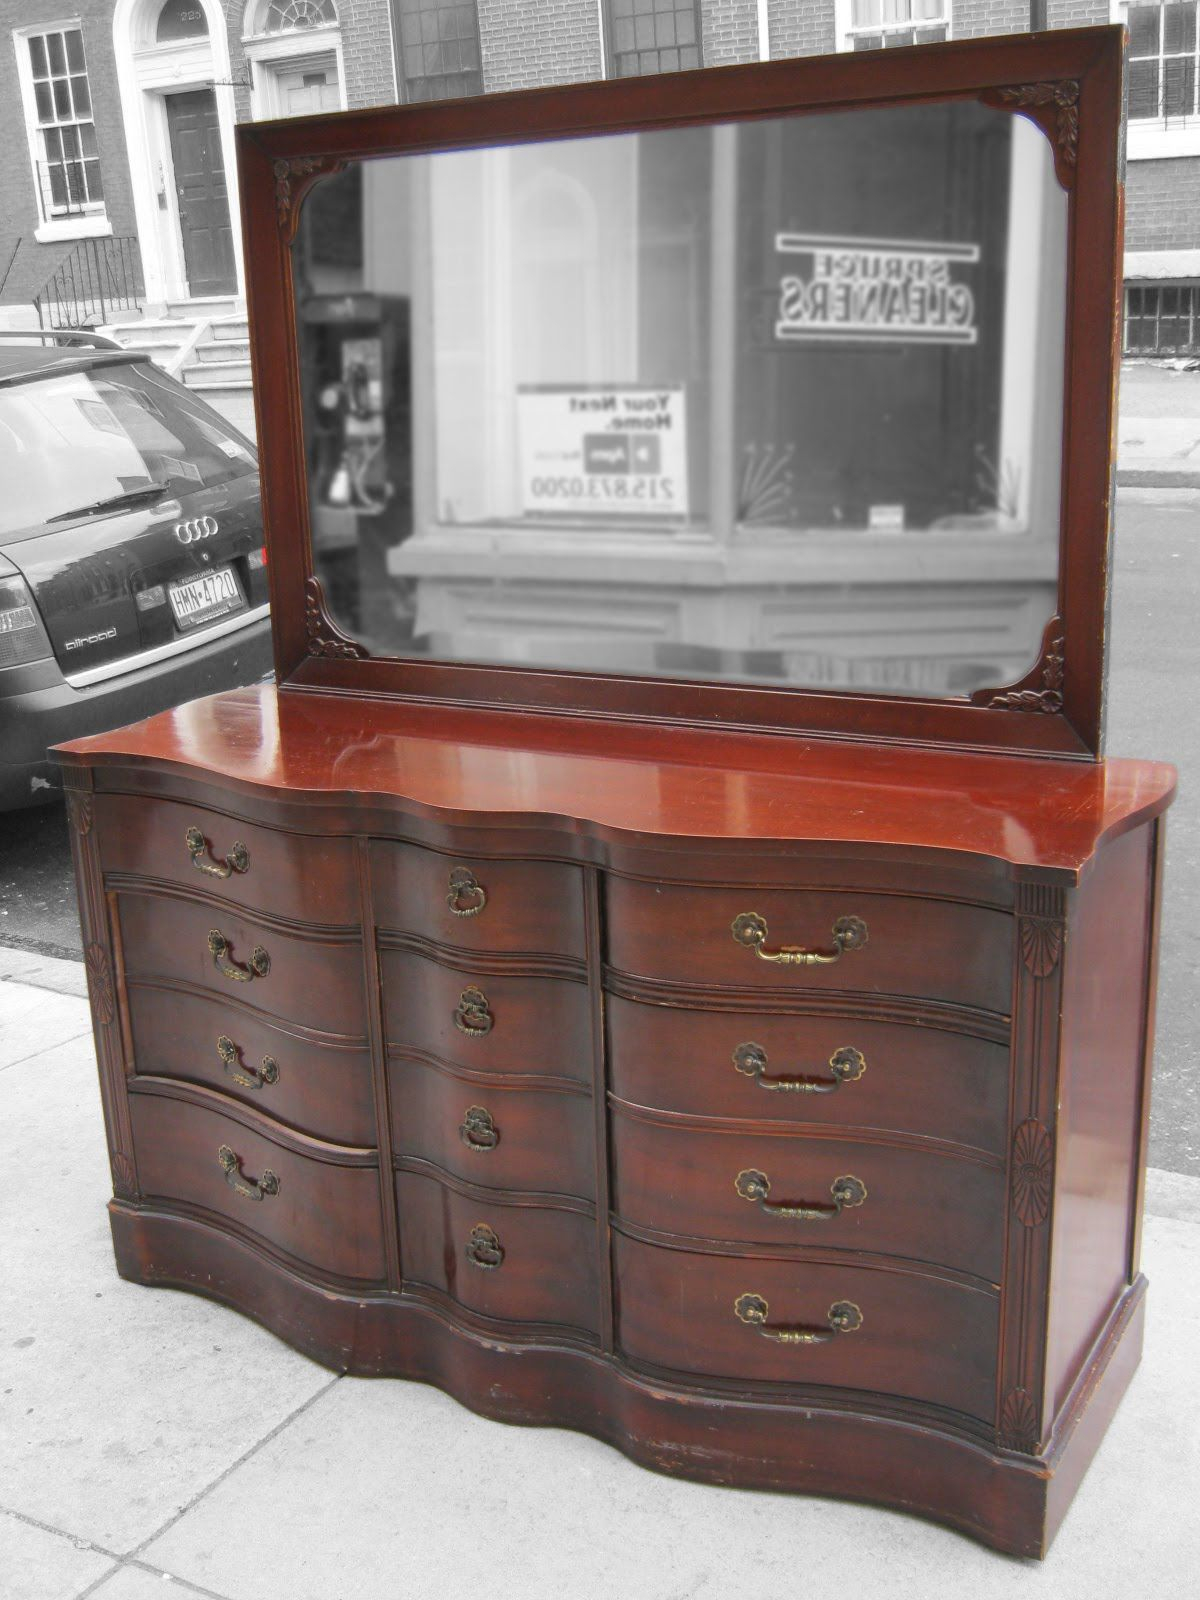 1940s Furniture 1940s Mahogany Bedroom Set Sold 1940s Style intended for dimensions 1200 X 1600